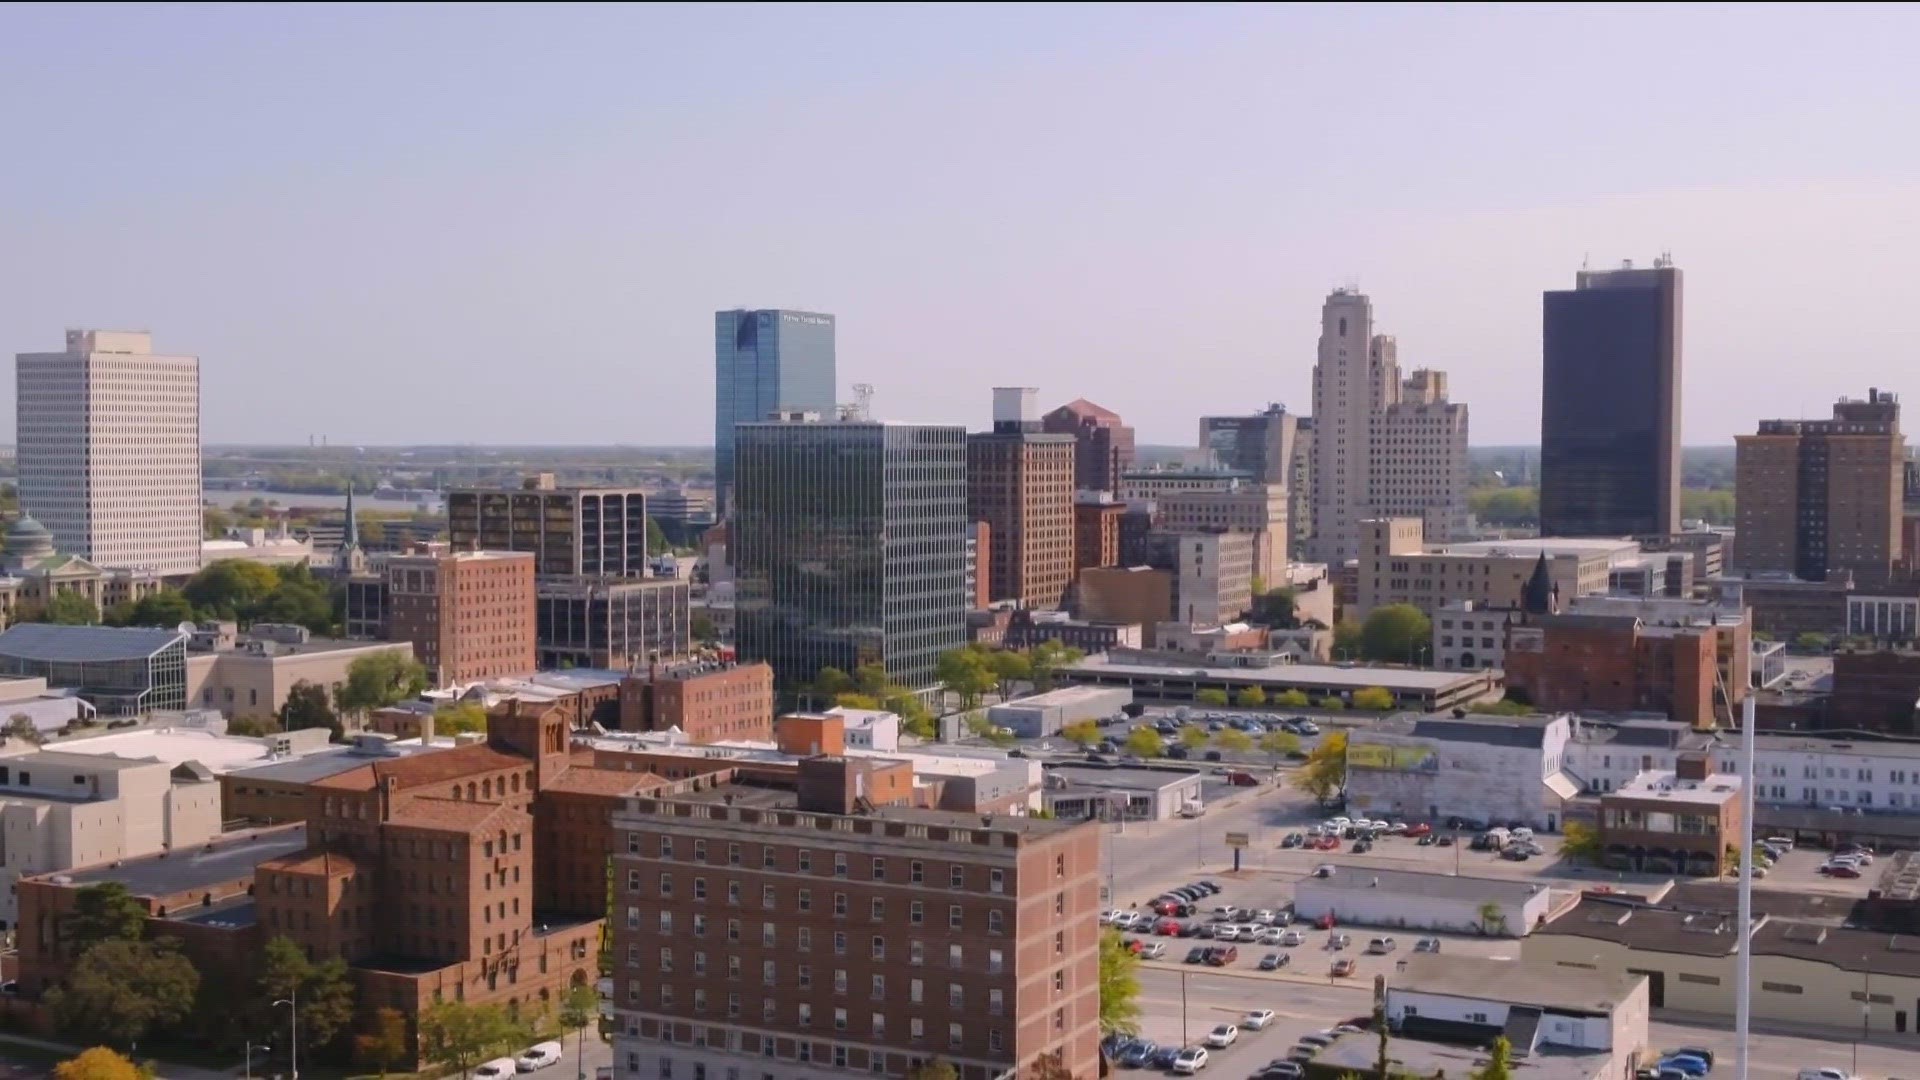 ConnecToledo just released its updated Downtown Master Plan and it calls for more growth in the future.